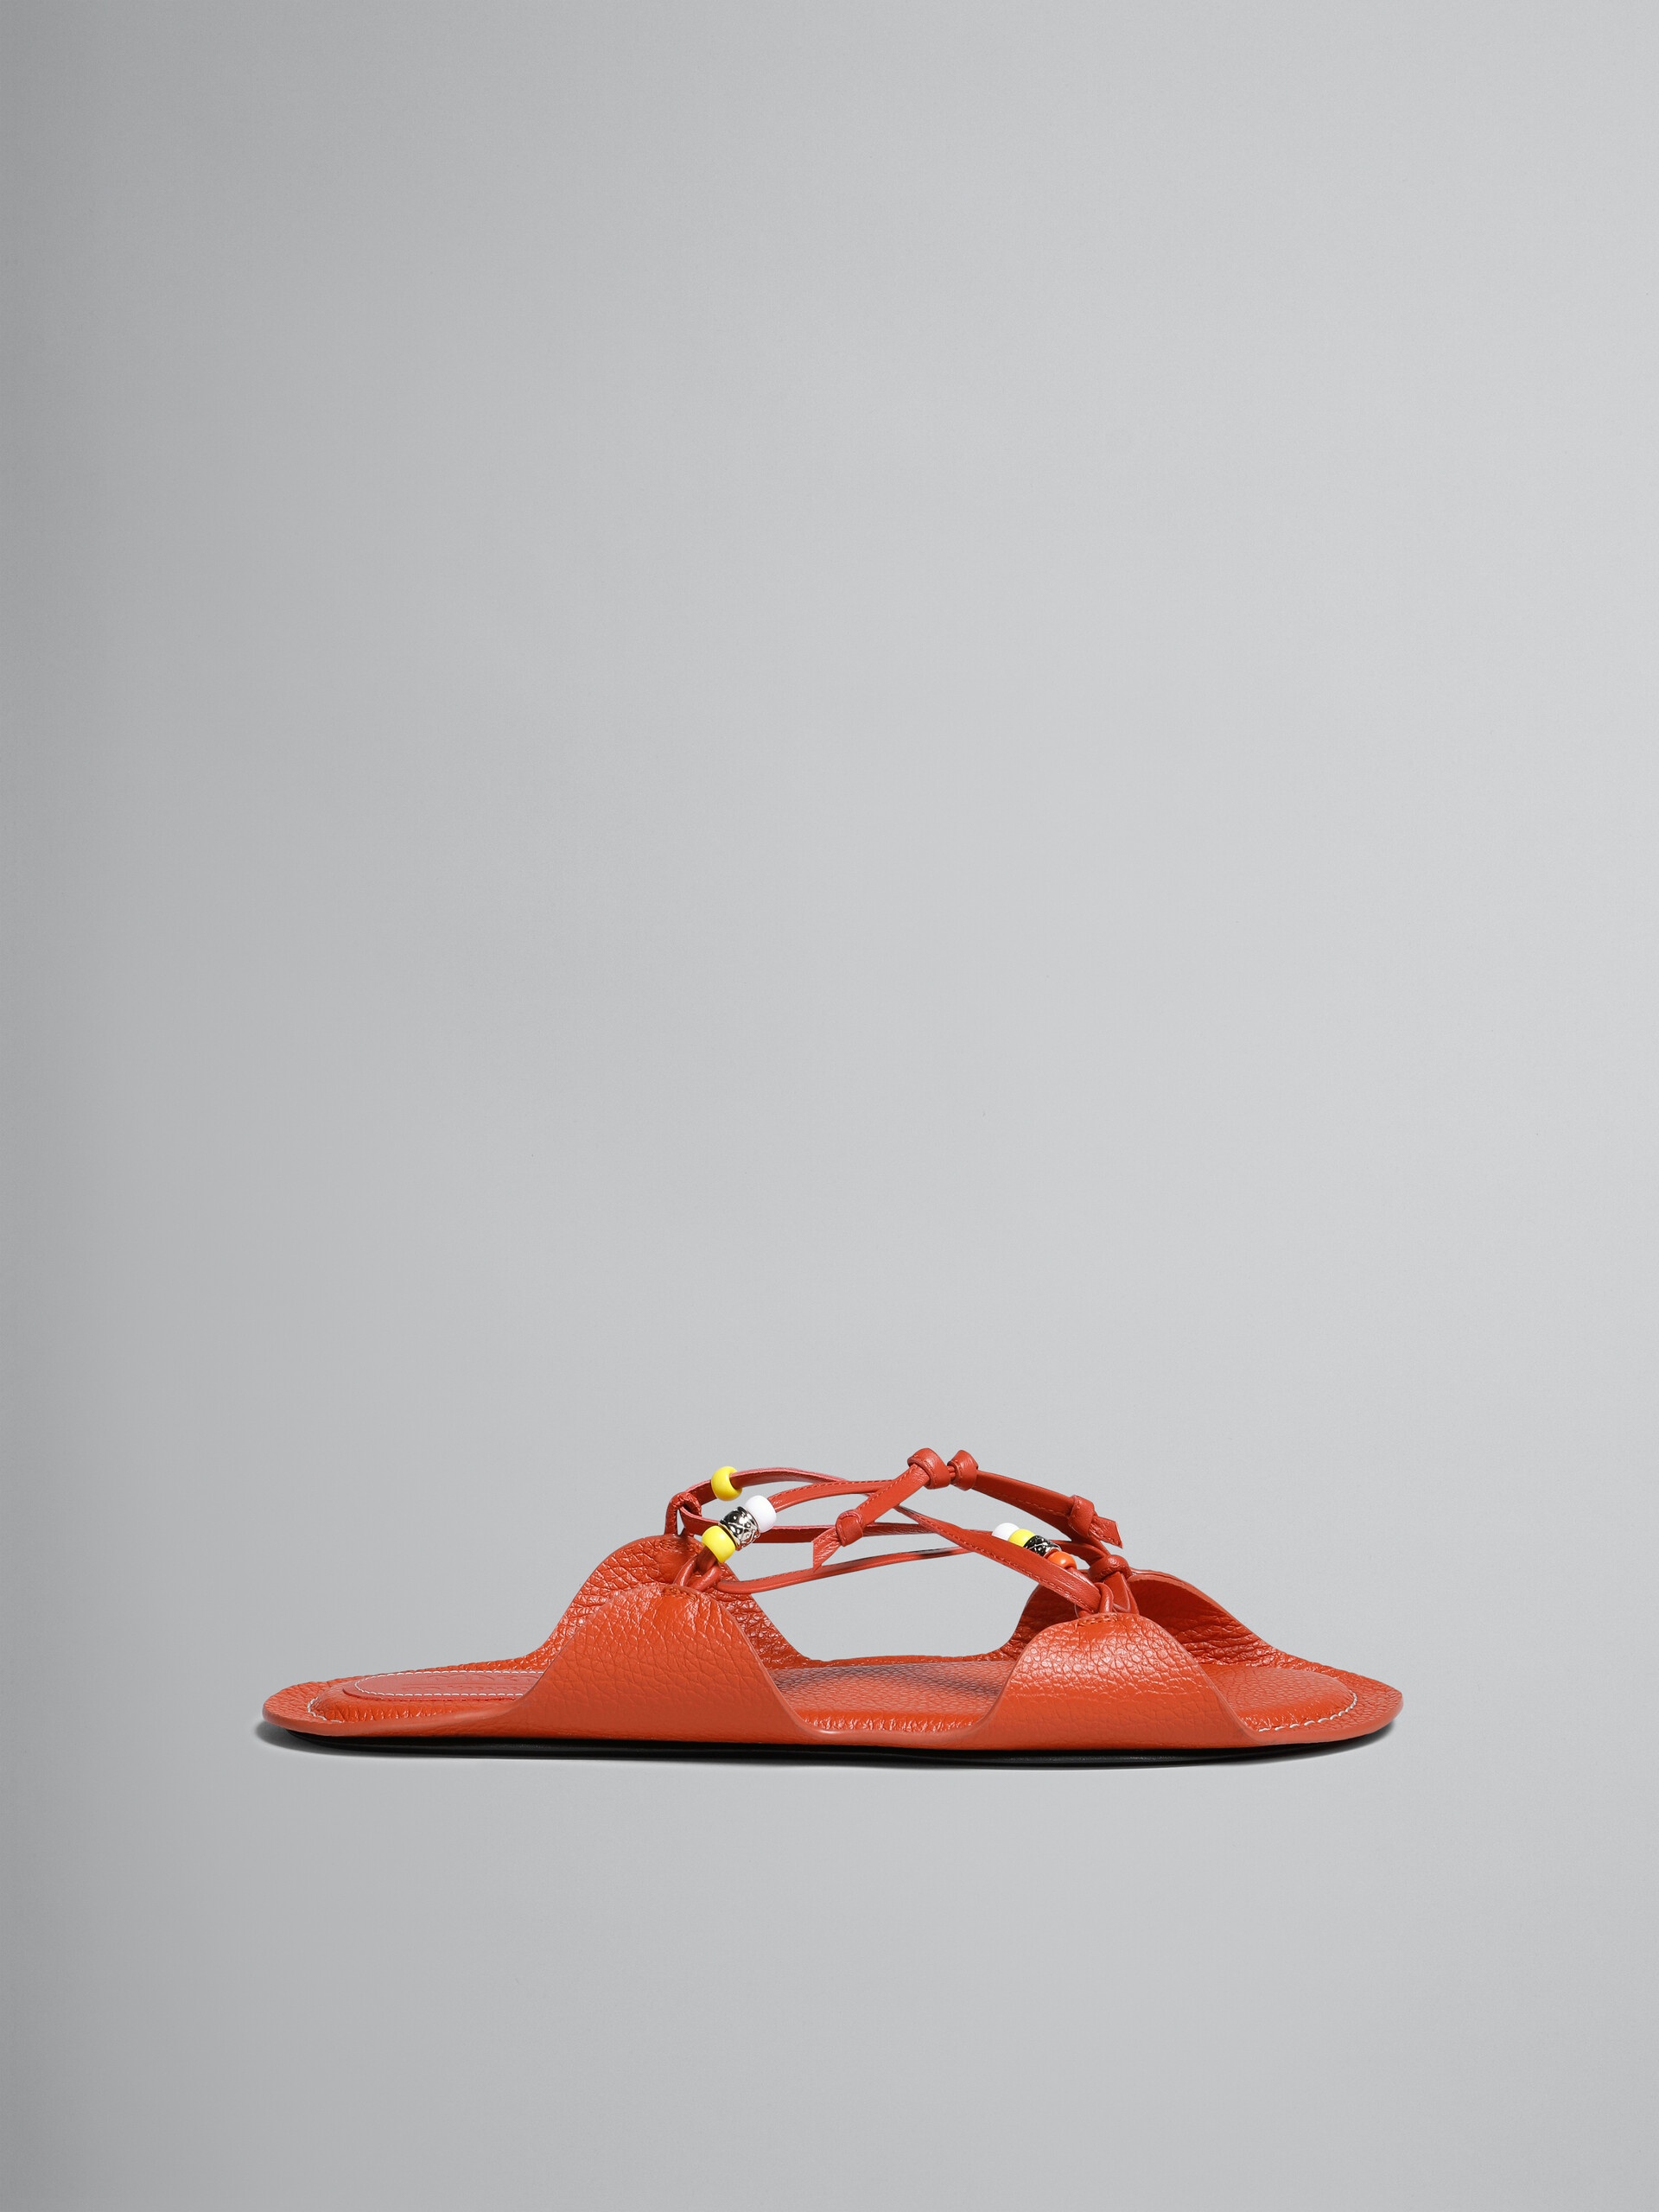 MARNI X NO VACANCY INN - BRICK RED LEATHER SANDALS WITH BEADS - 1